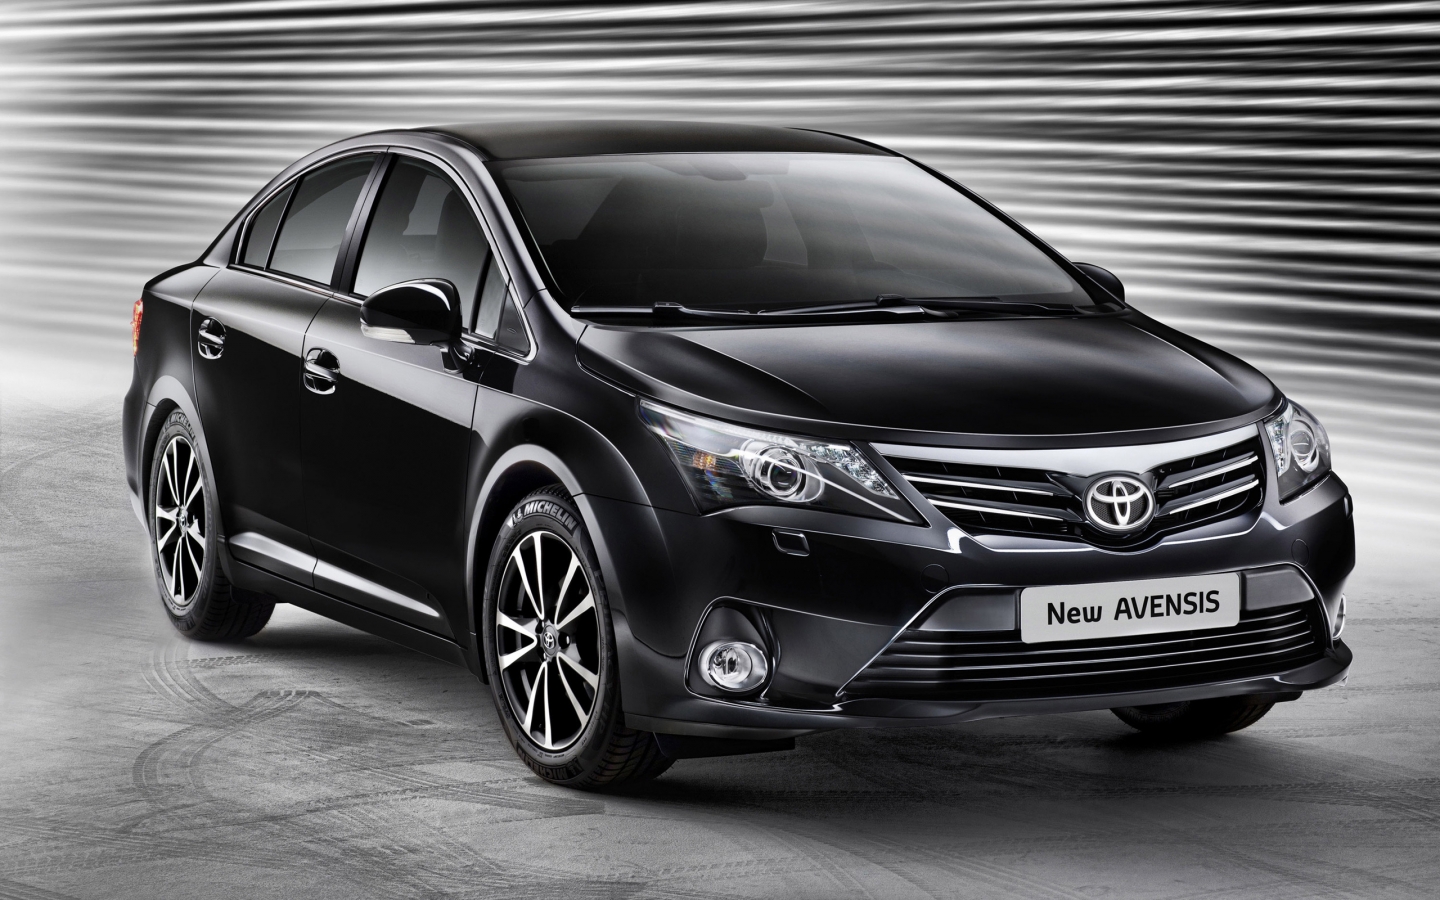 2012 Toyota Avensis for 1440 x 900 widescreen resolution